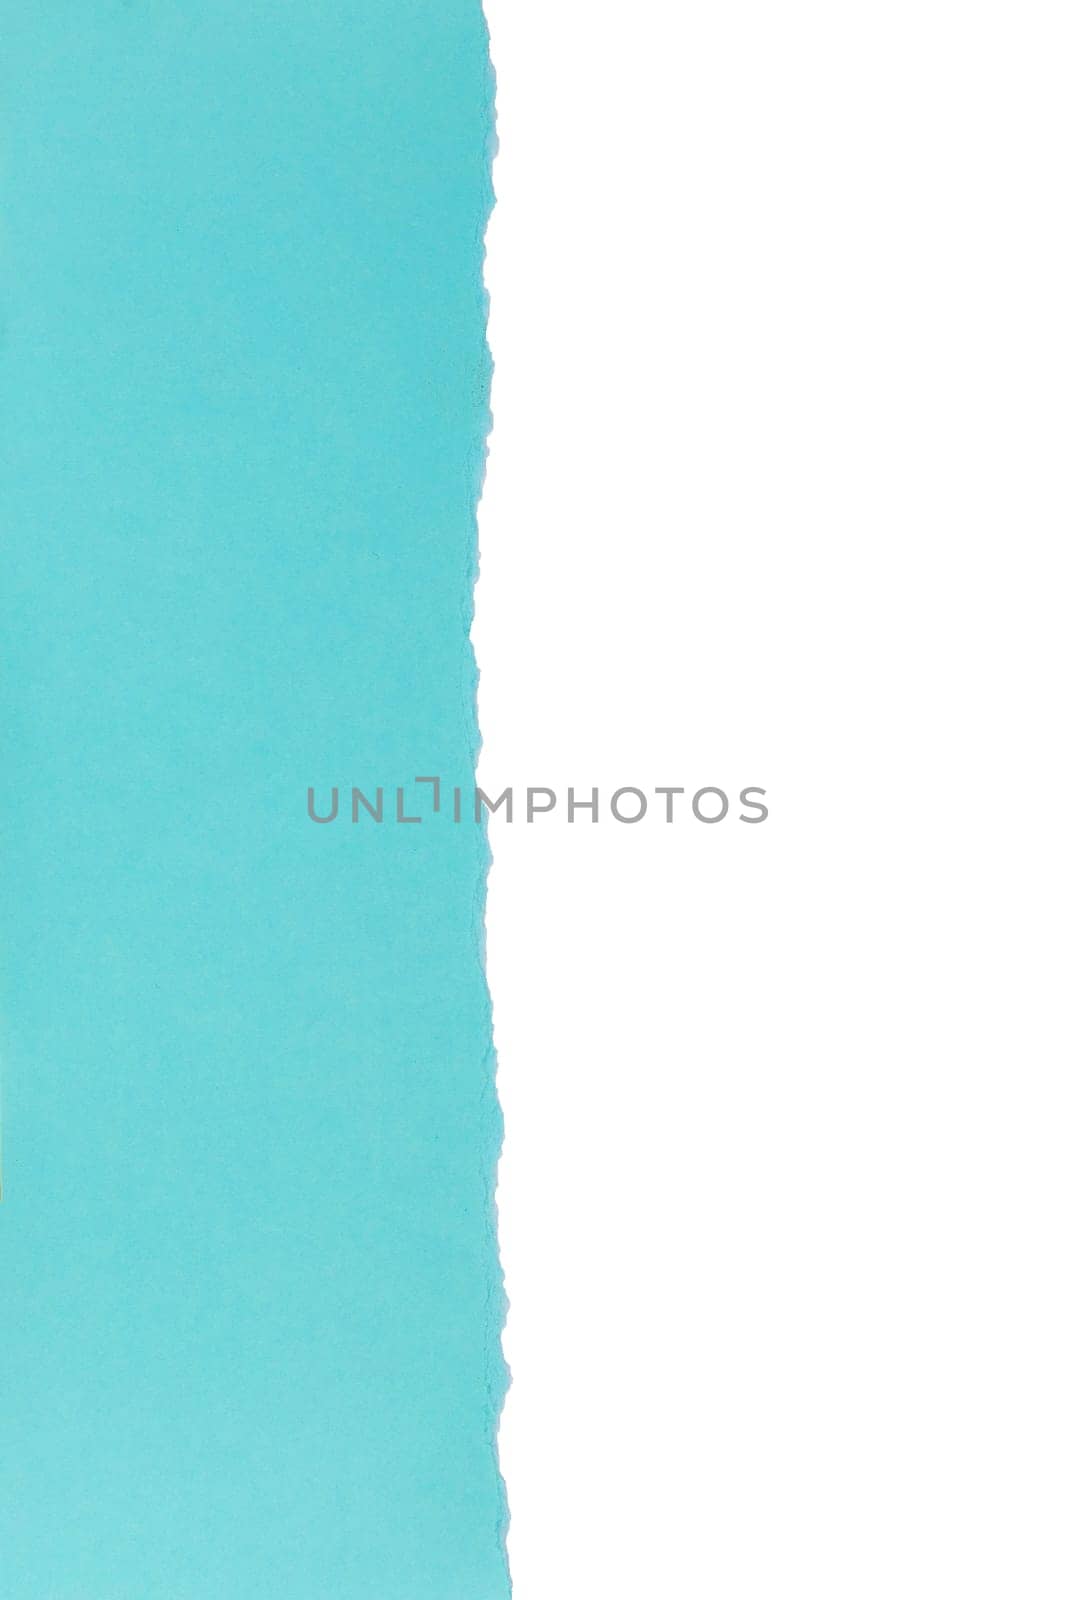 Blue paper torn in half page isolated on white background. Vertical by EdVal